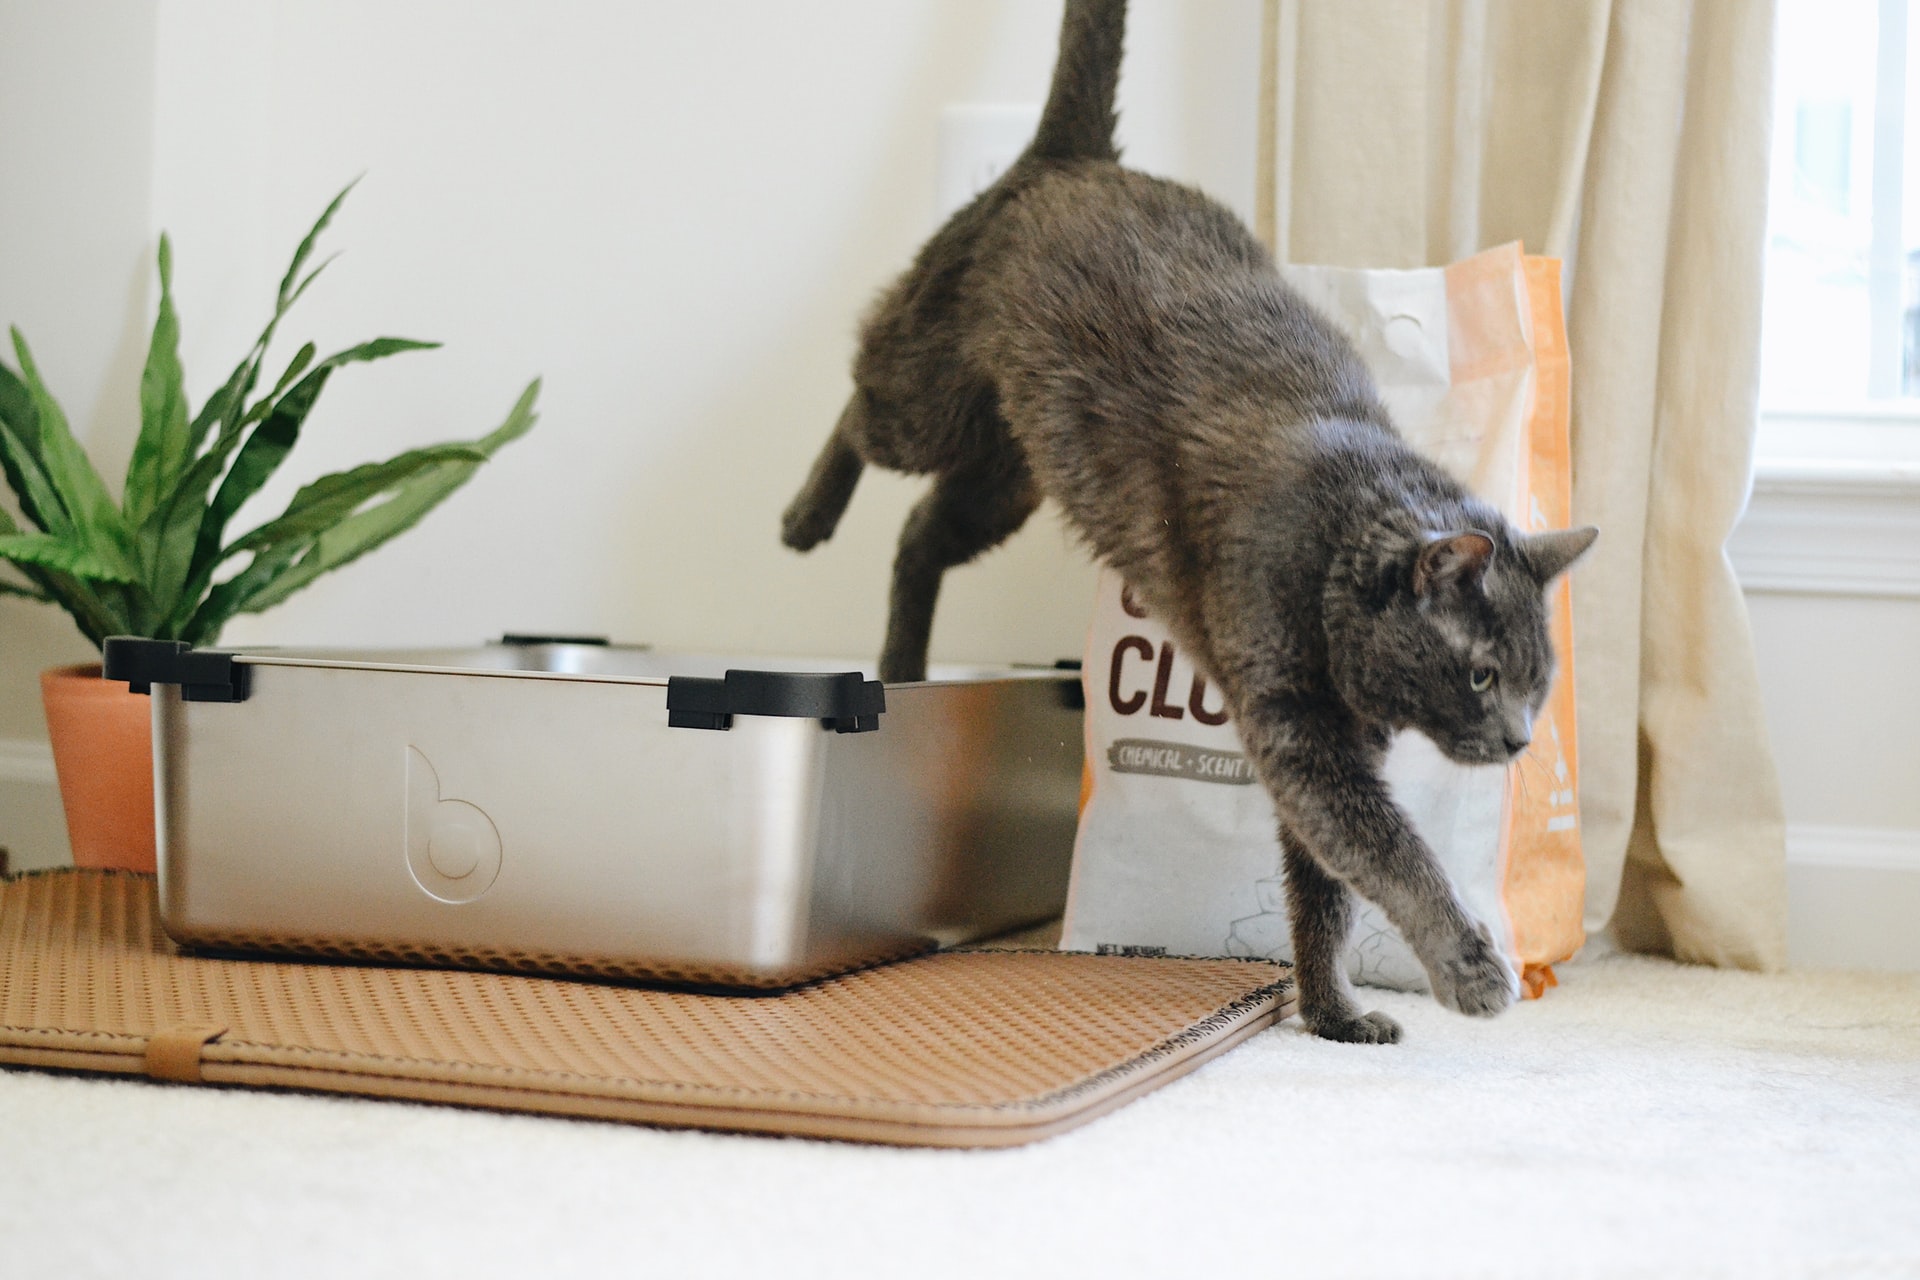 A grey cat stepping out of a litter box